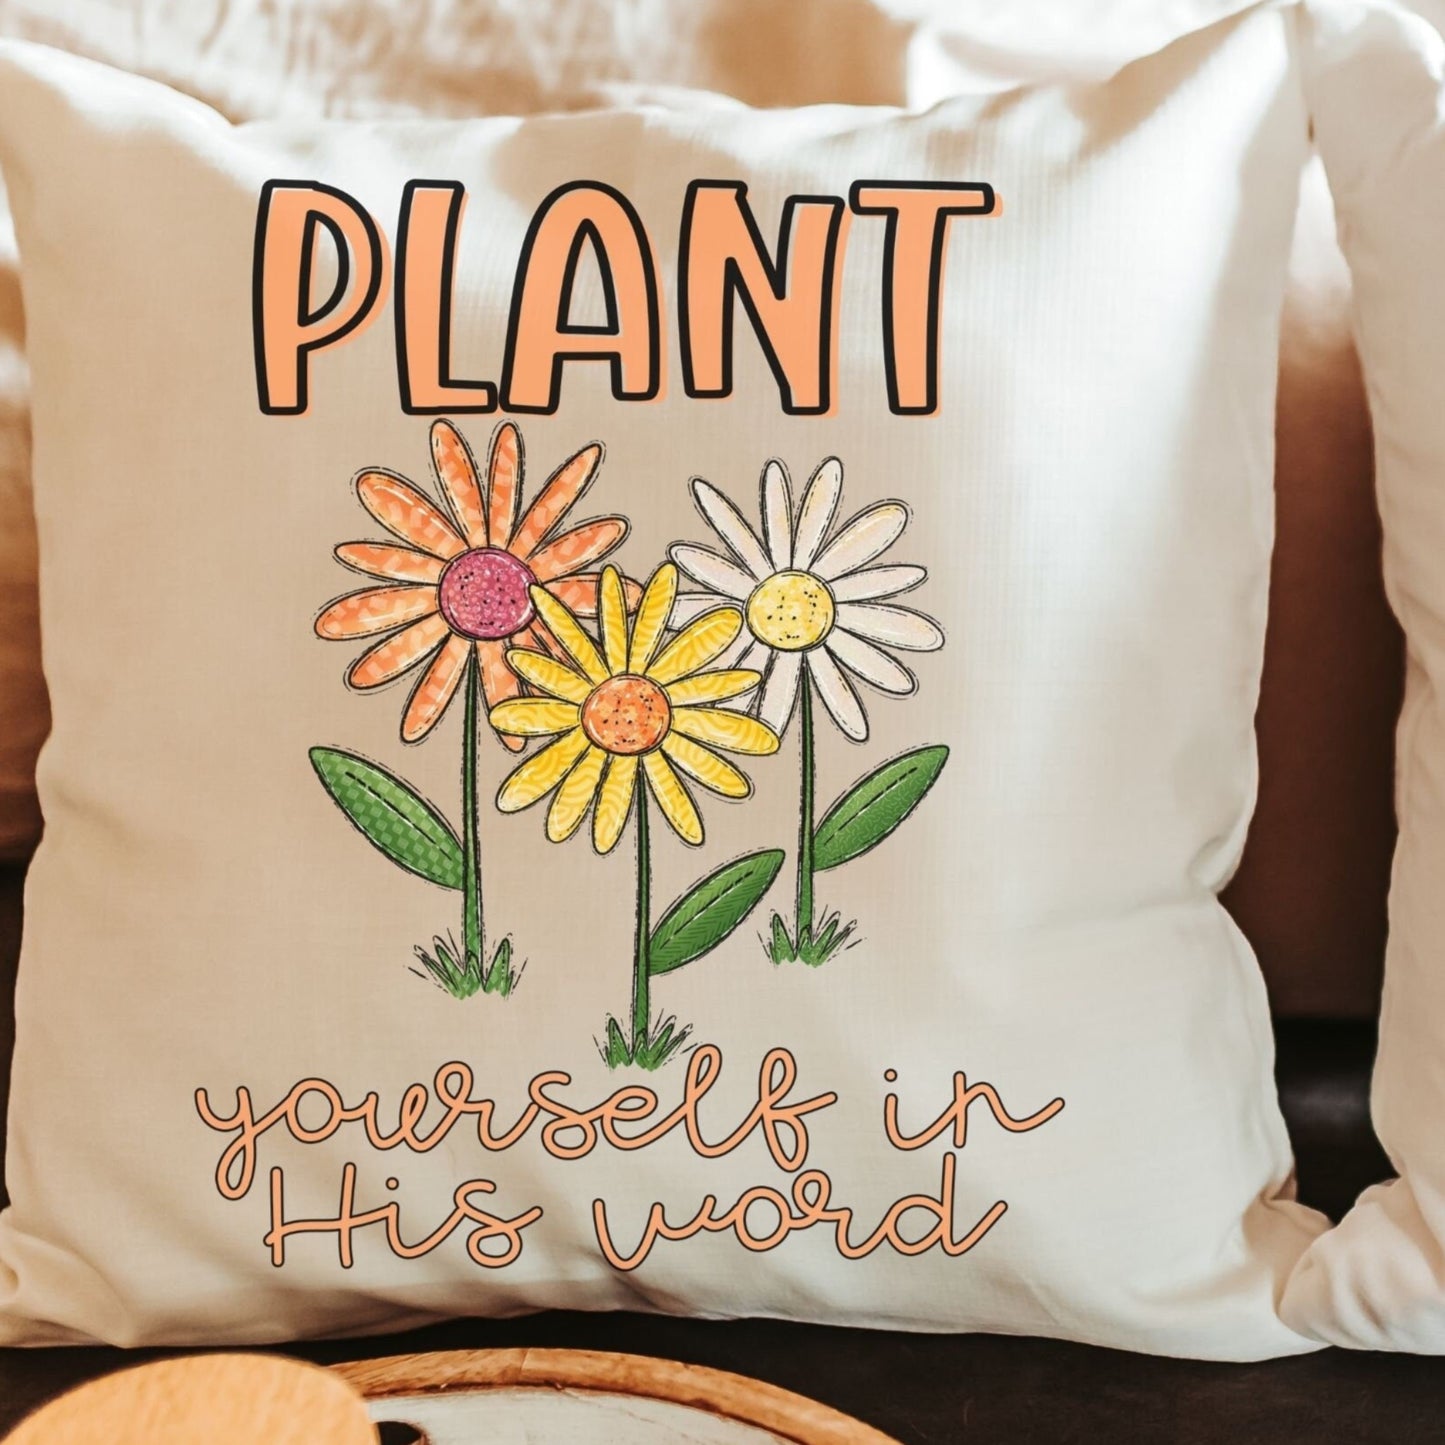 Plant Yourself In His Word Throw Pillow